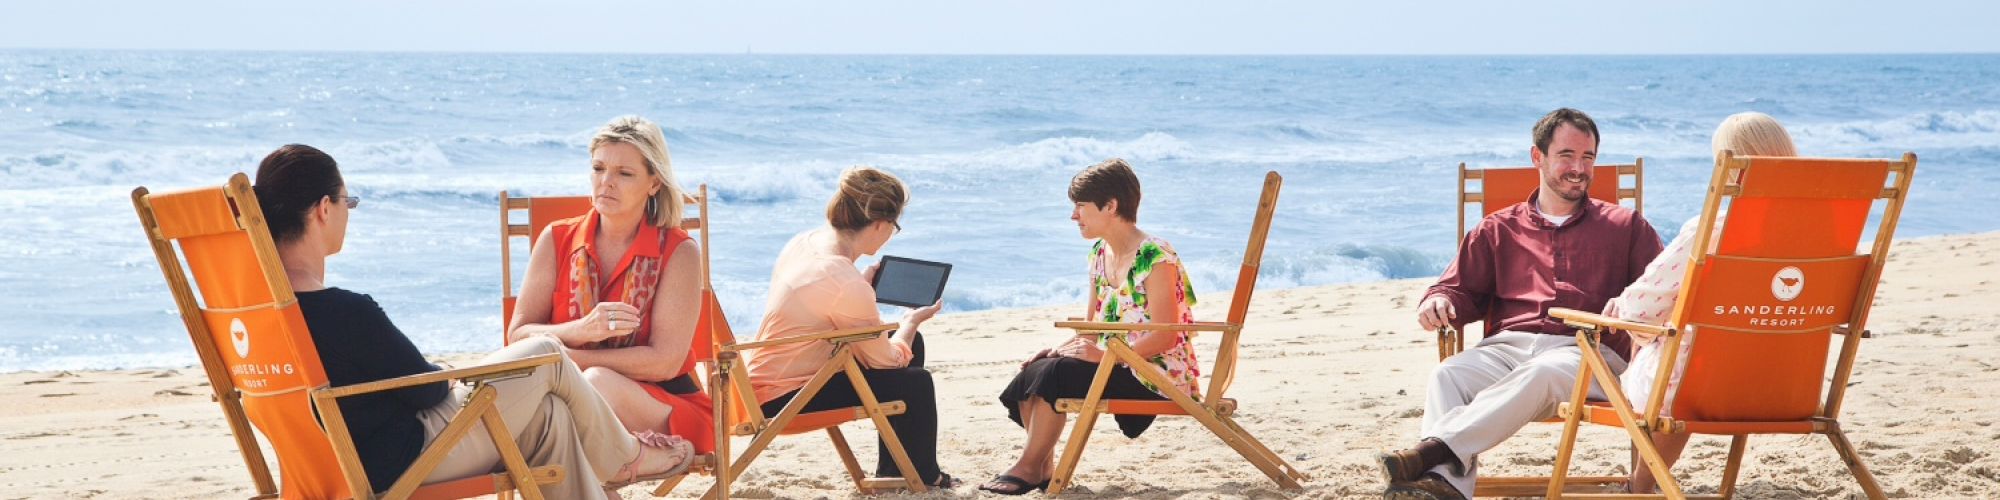 A group of people is sitting on orange beach chairs having conversations and using a laptop near the ocean on a sandy beach.